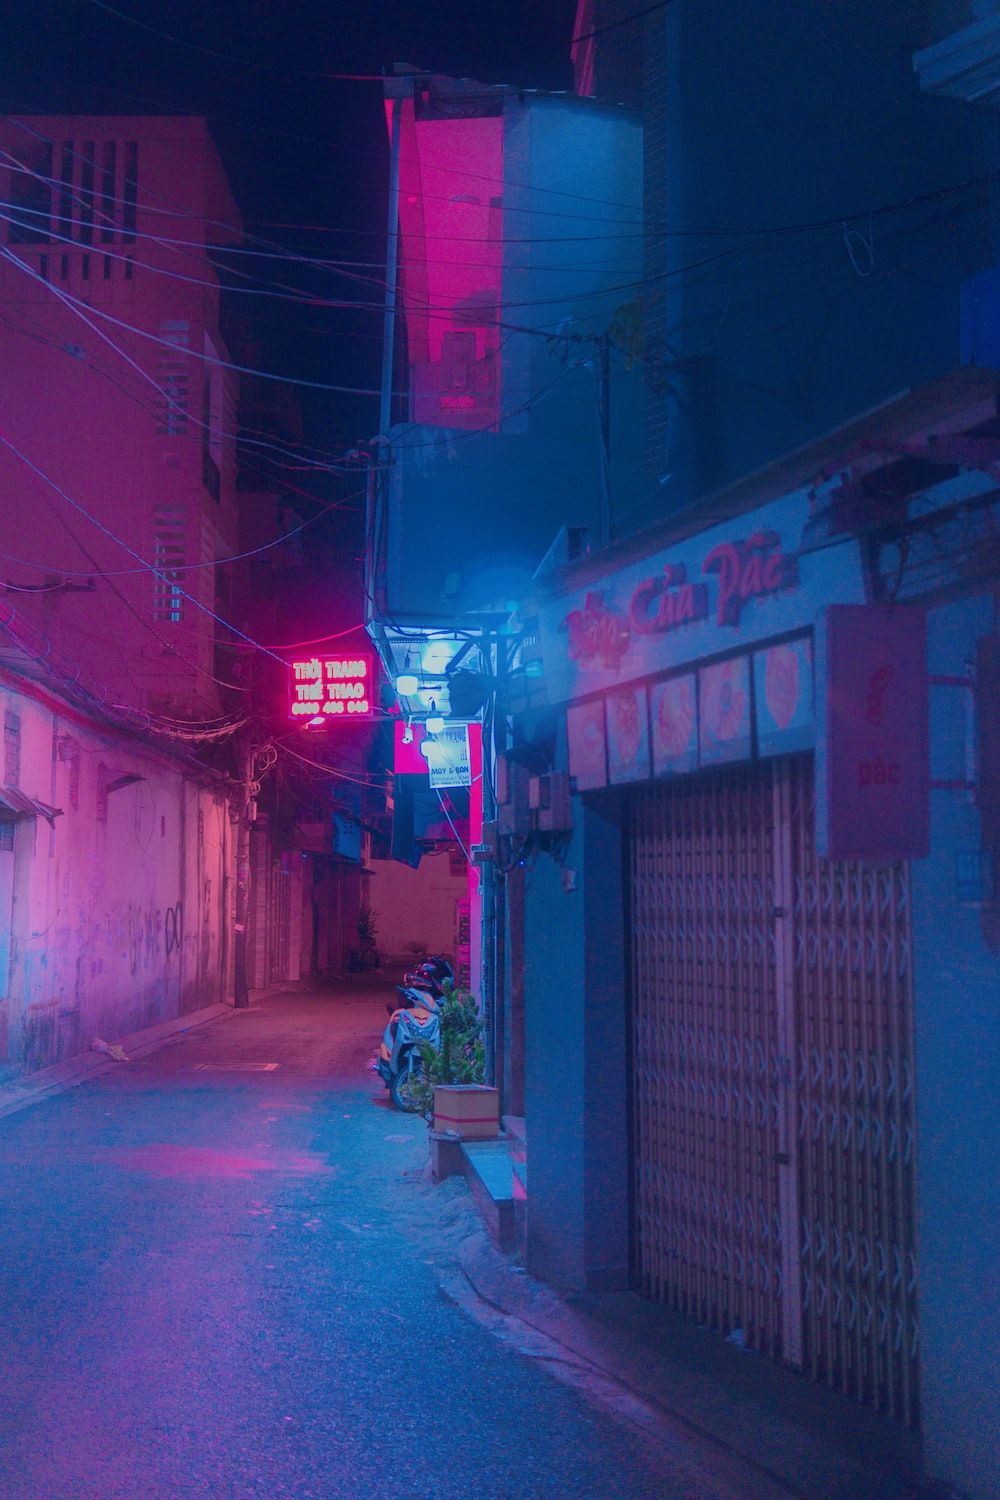 A street with buildings and neon lights - Neon, punk